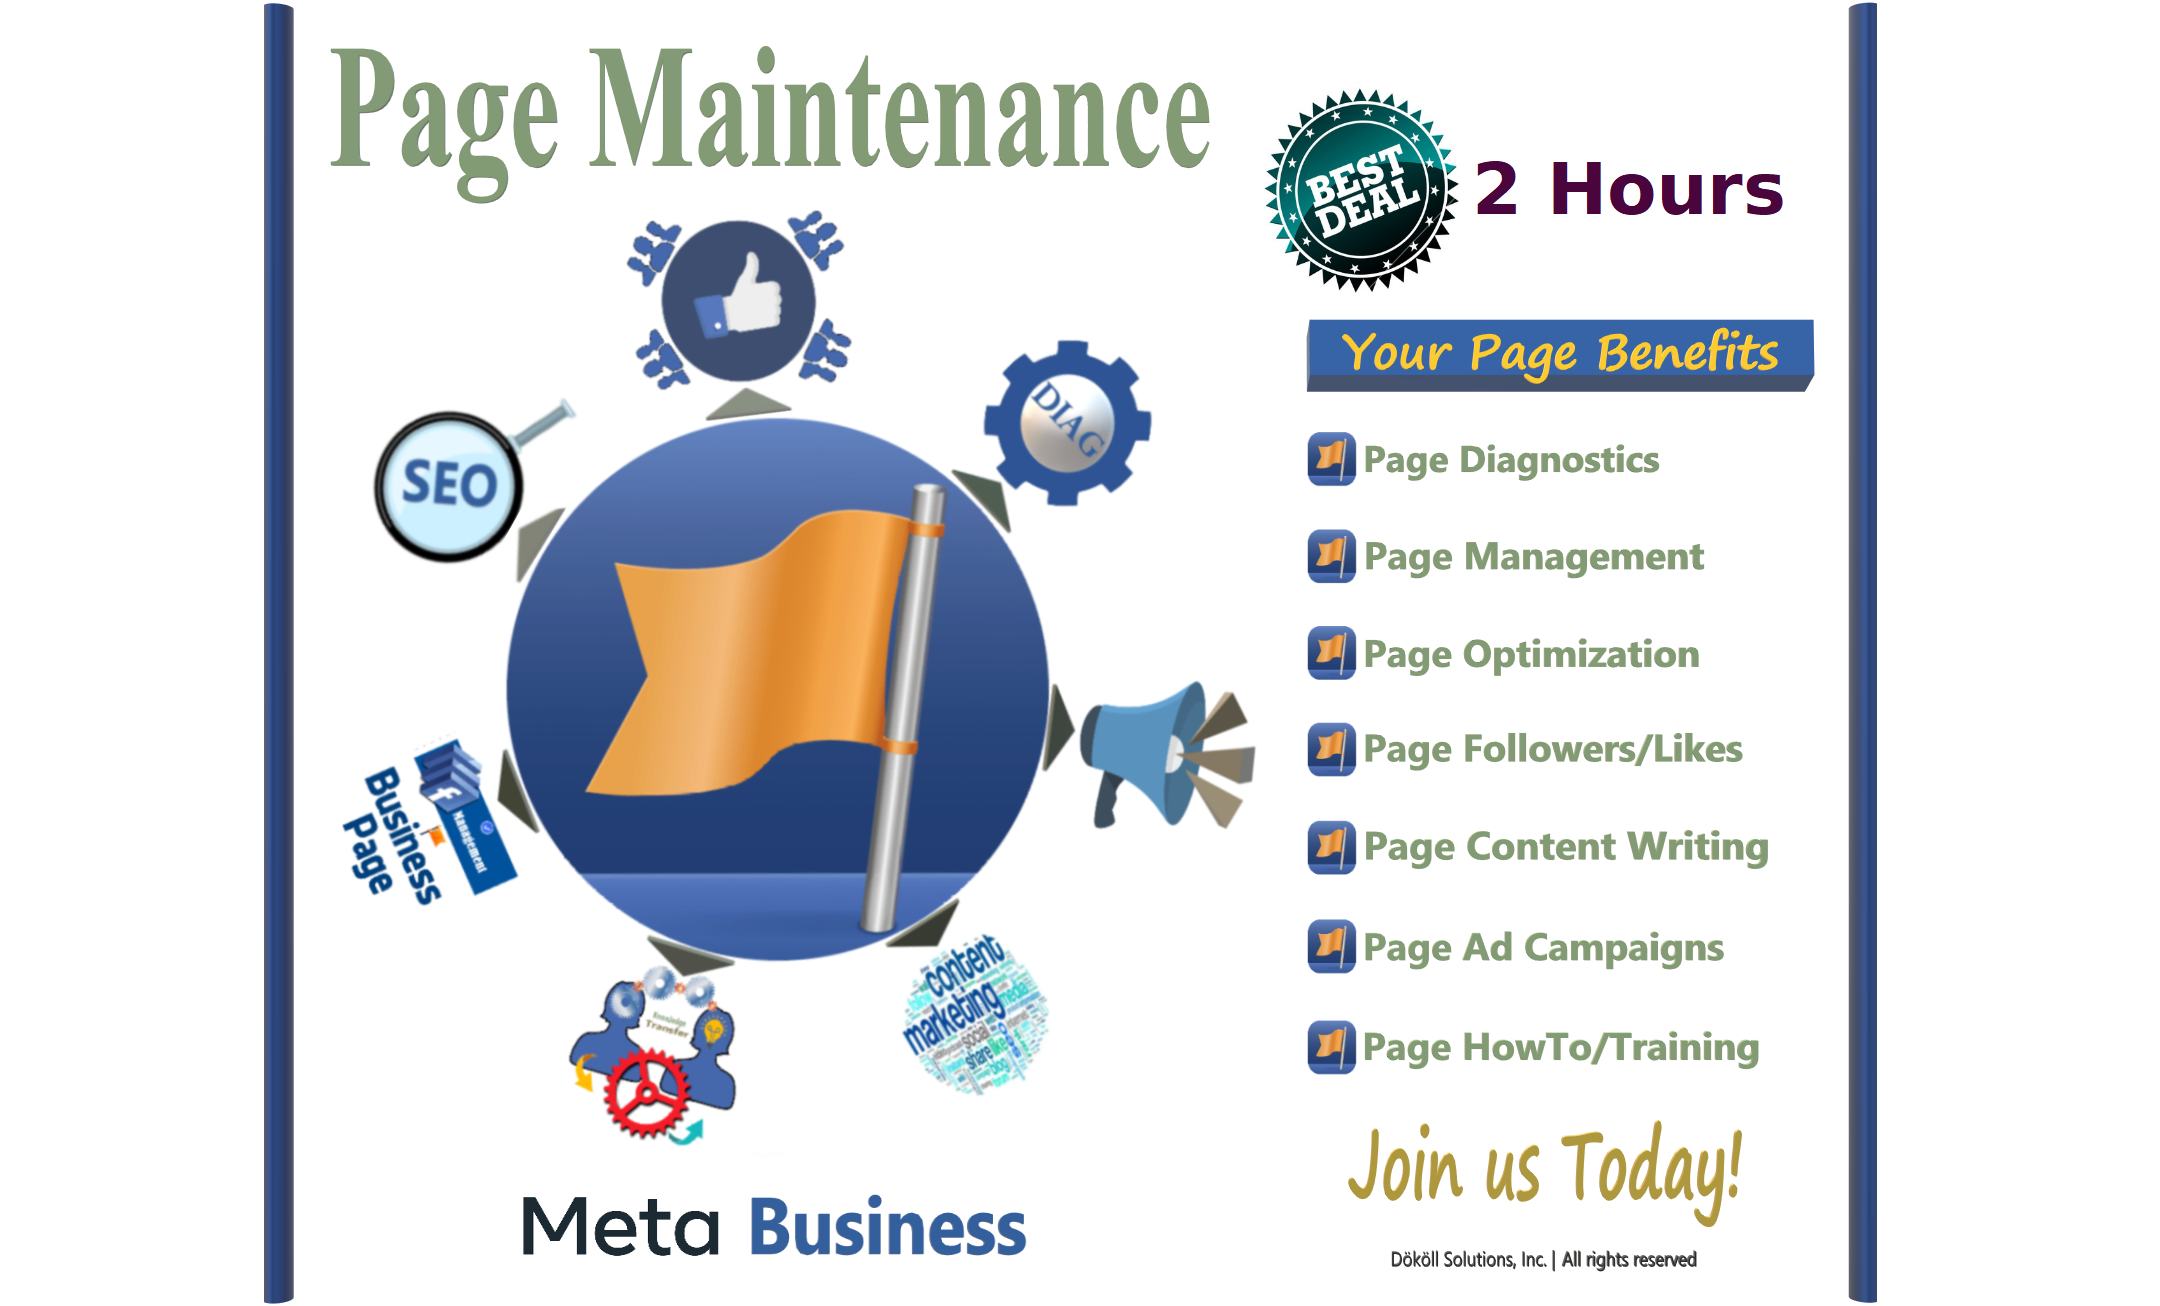 Facebook Two-Hour Page Services